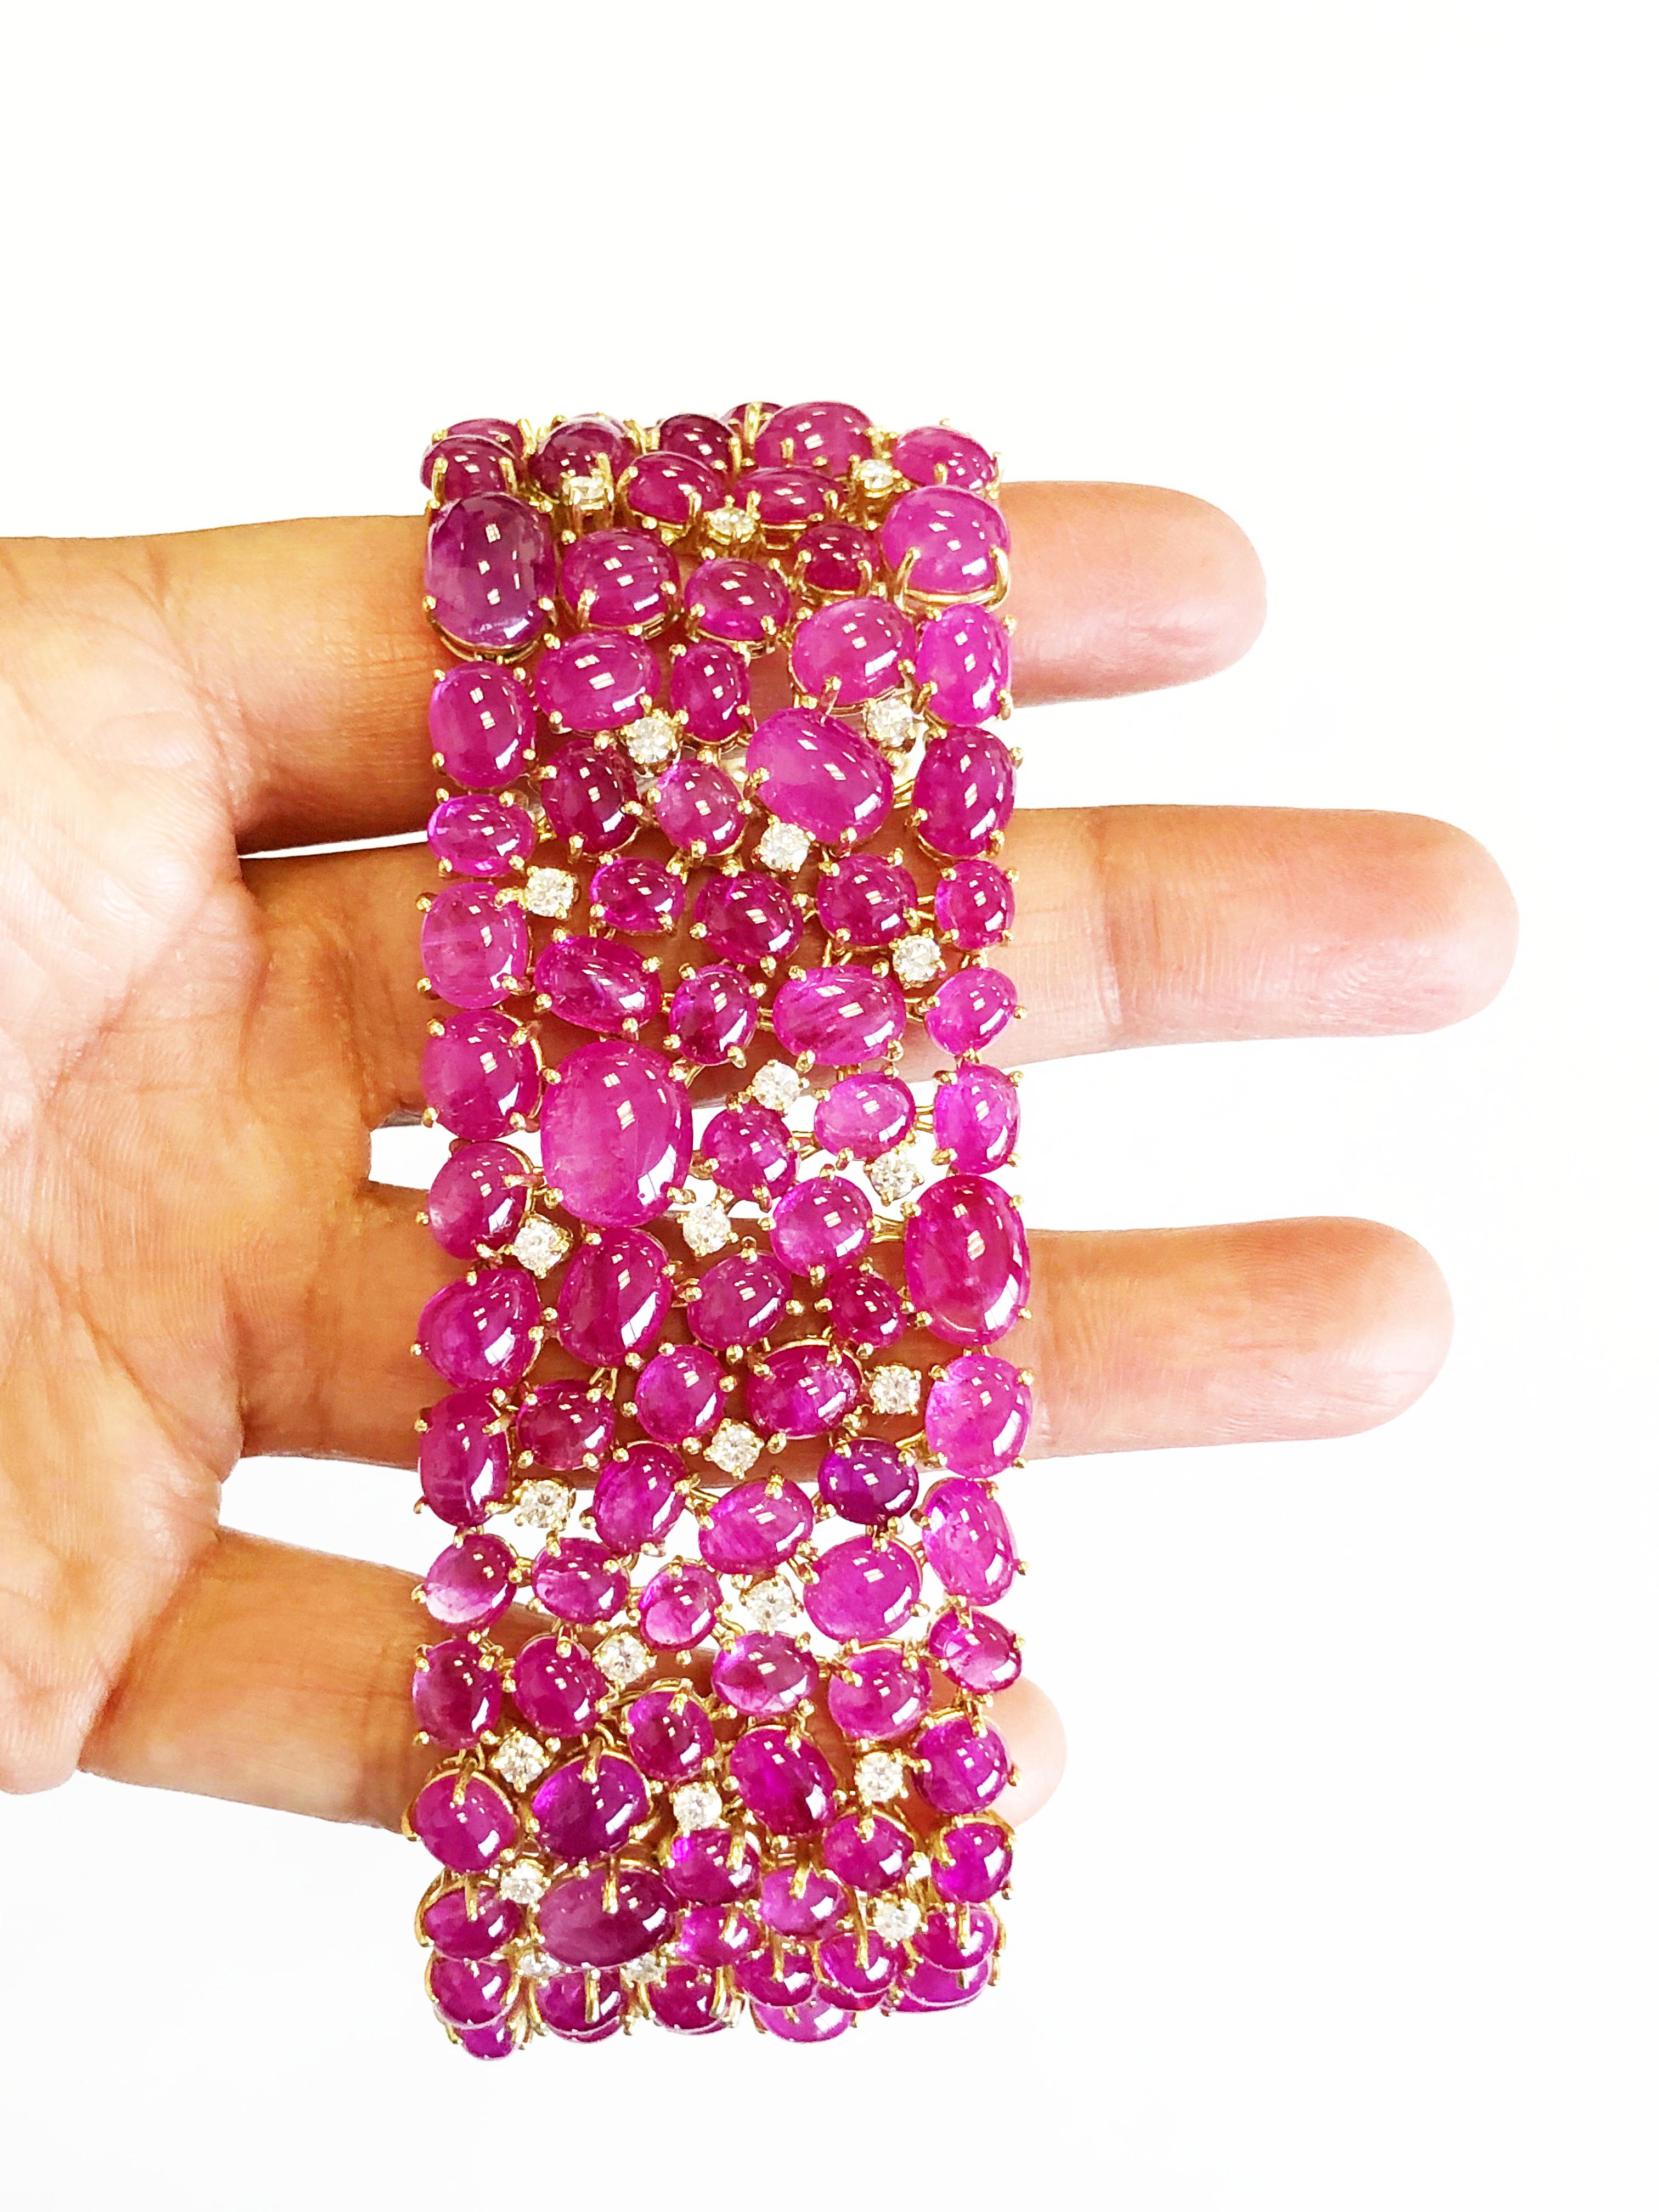 This breathtaking cluster bracelet showcases a hue of Burmese red ruby cabochons weighing 202.57 carats and 2.79 carats of white bright diamond rounds.  Handcrafted in a dainty, flexible, yet solid manner in 18k yellow gold.  Standard length of 7